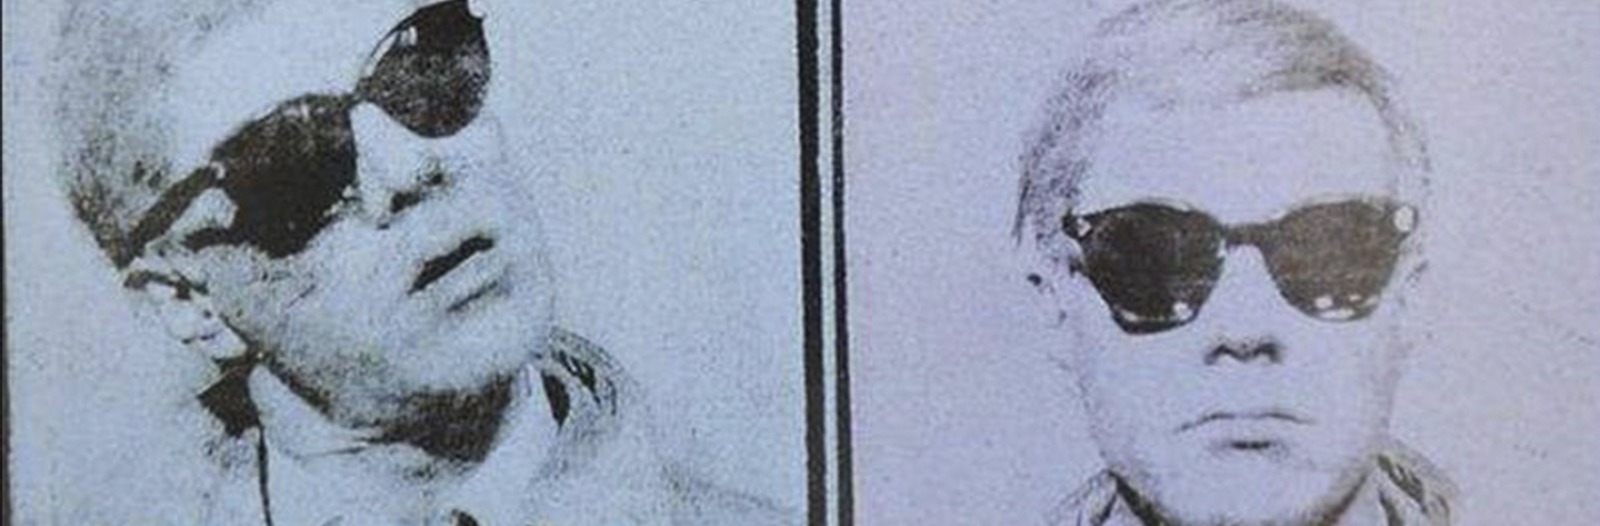 2 headshots of Andy Warhol, a detail from his 1963-64 self-portrait